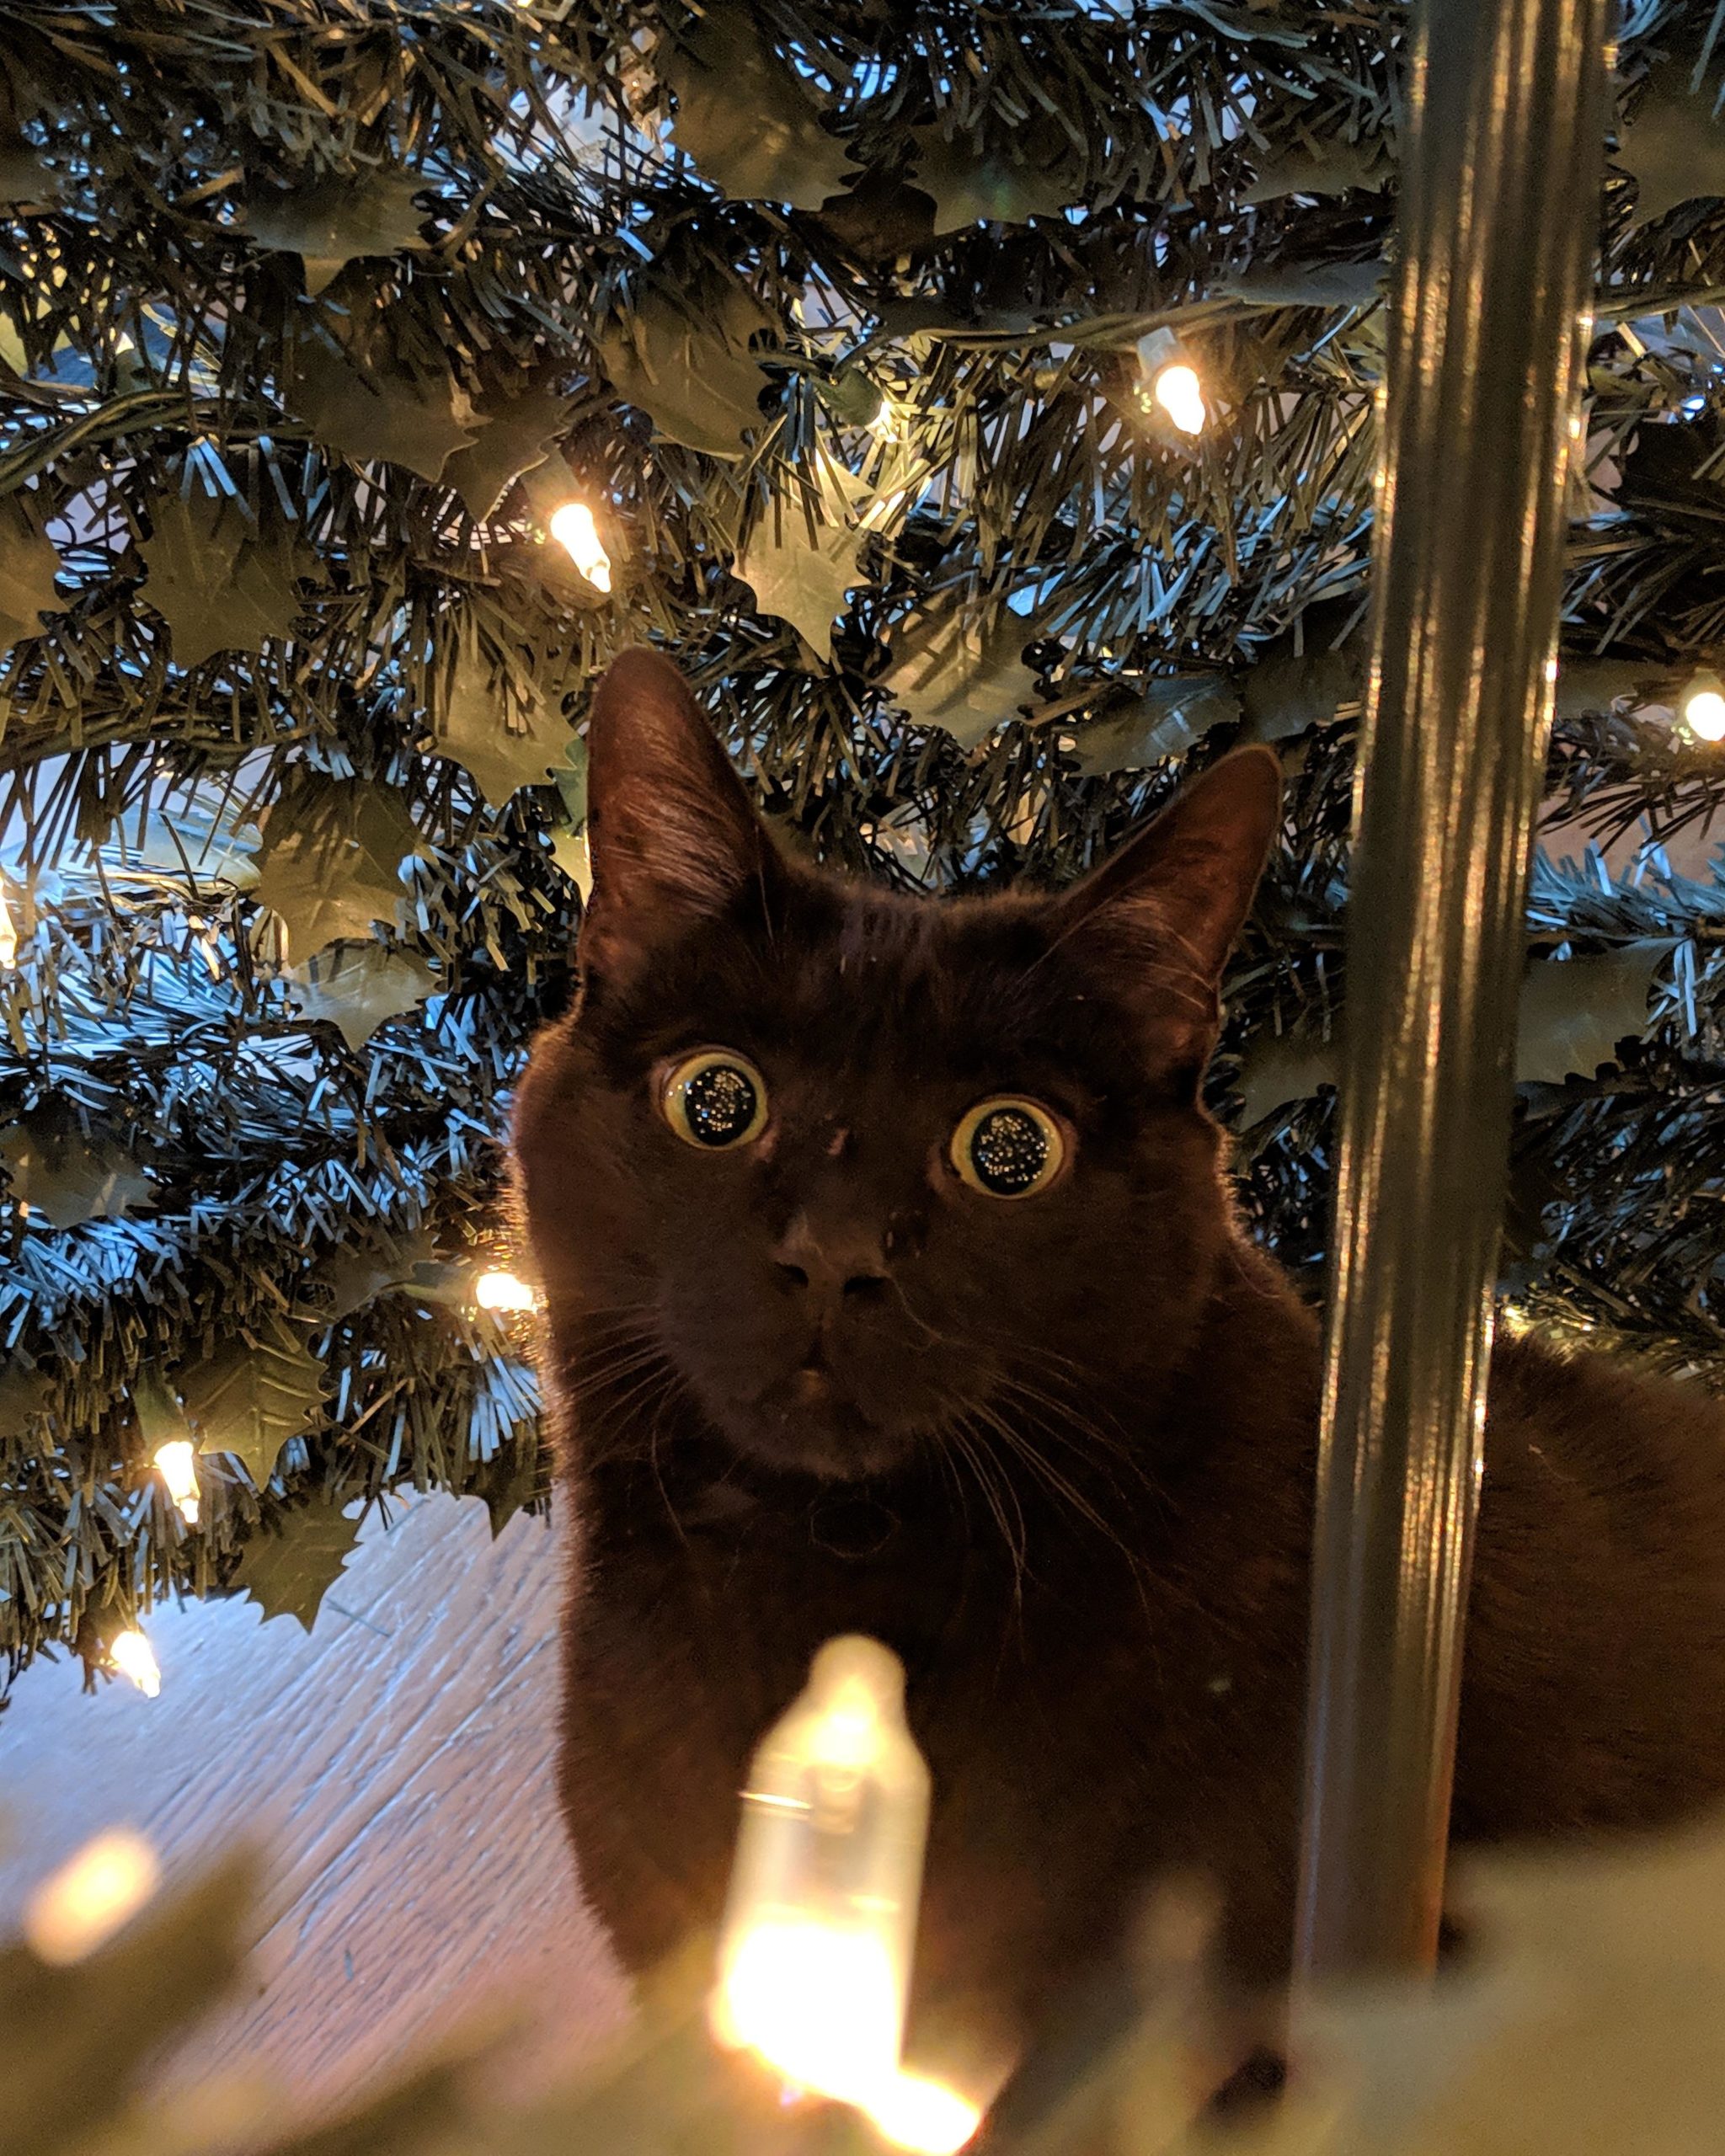 The+eyes+scream+the+tale+of+a+destroyed+Christmas+tree.